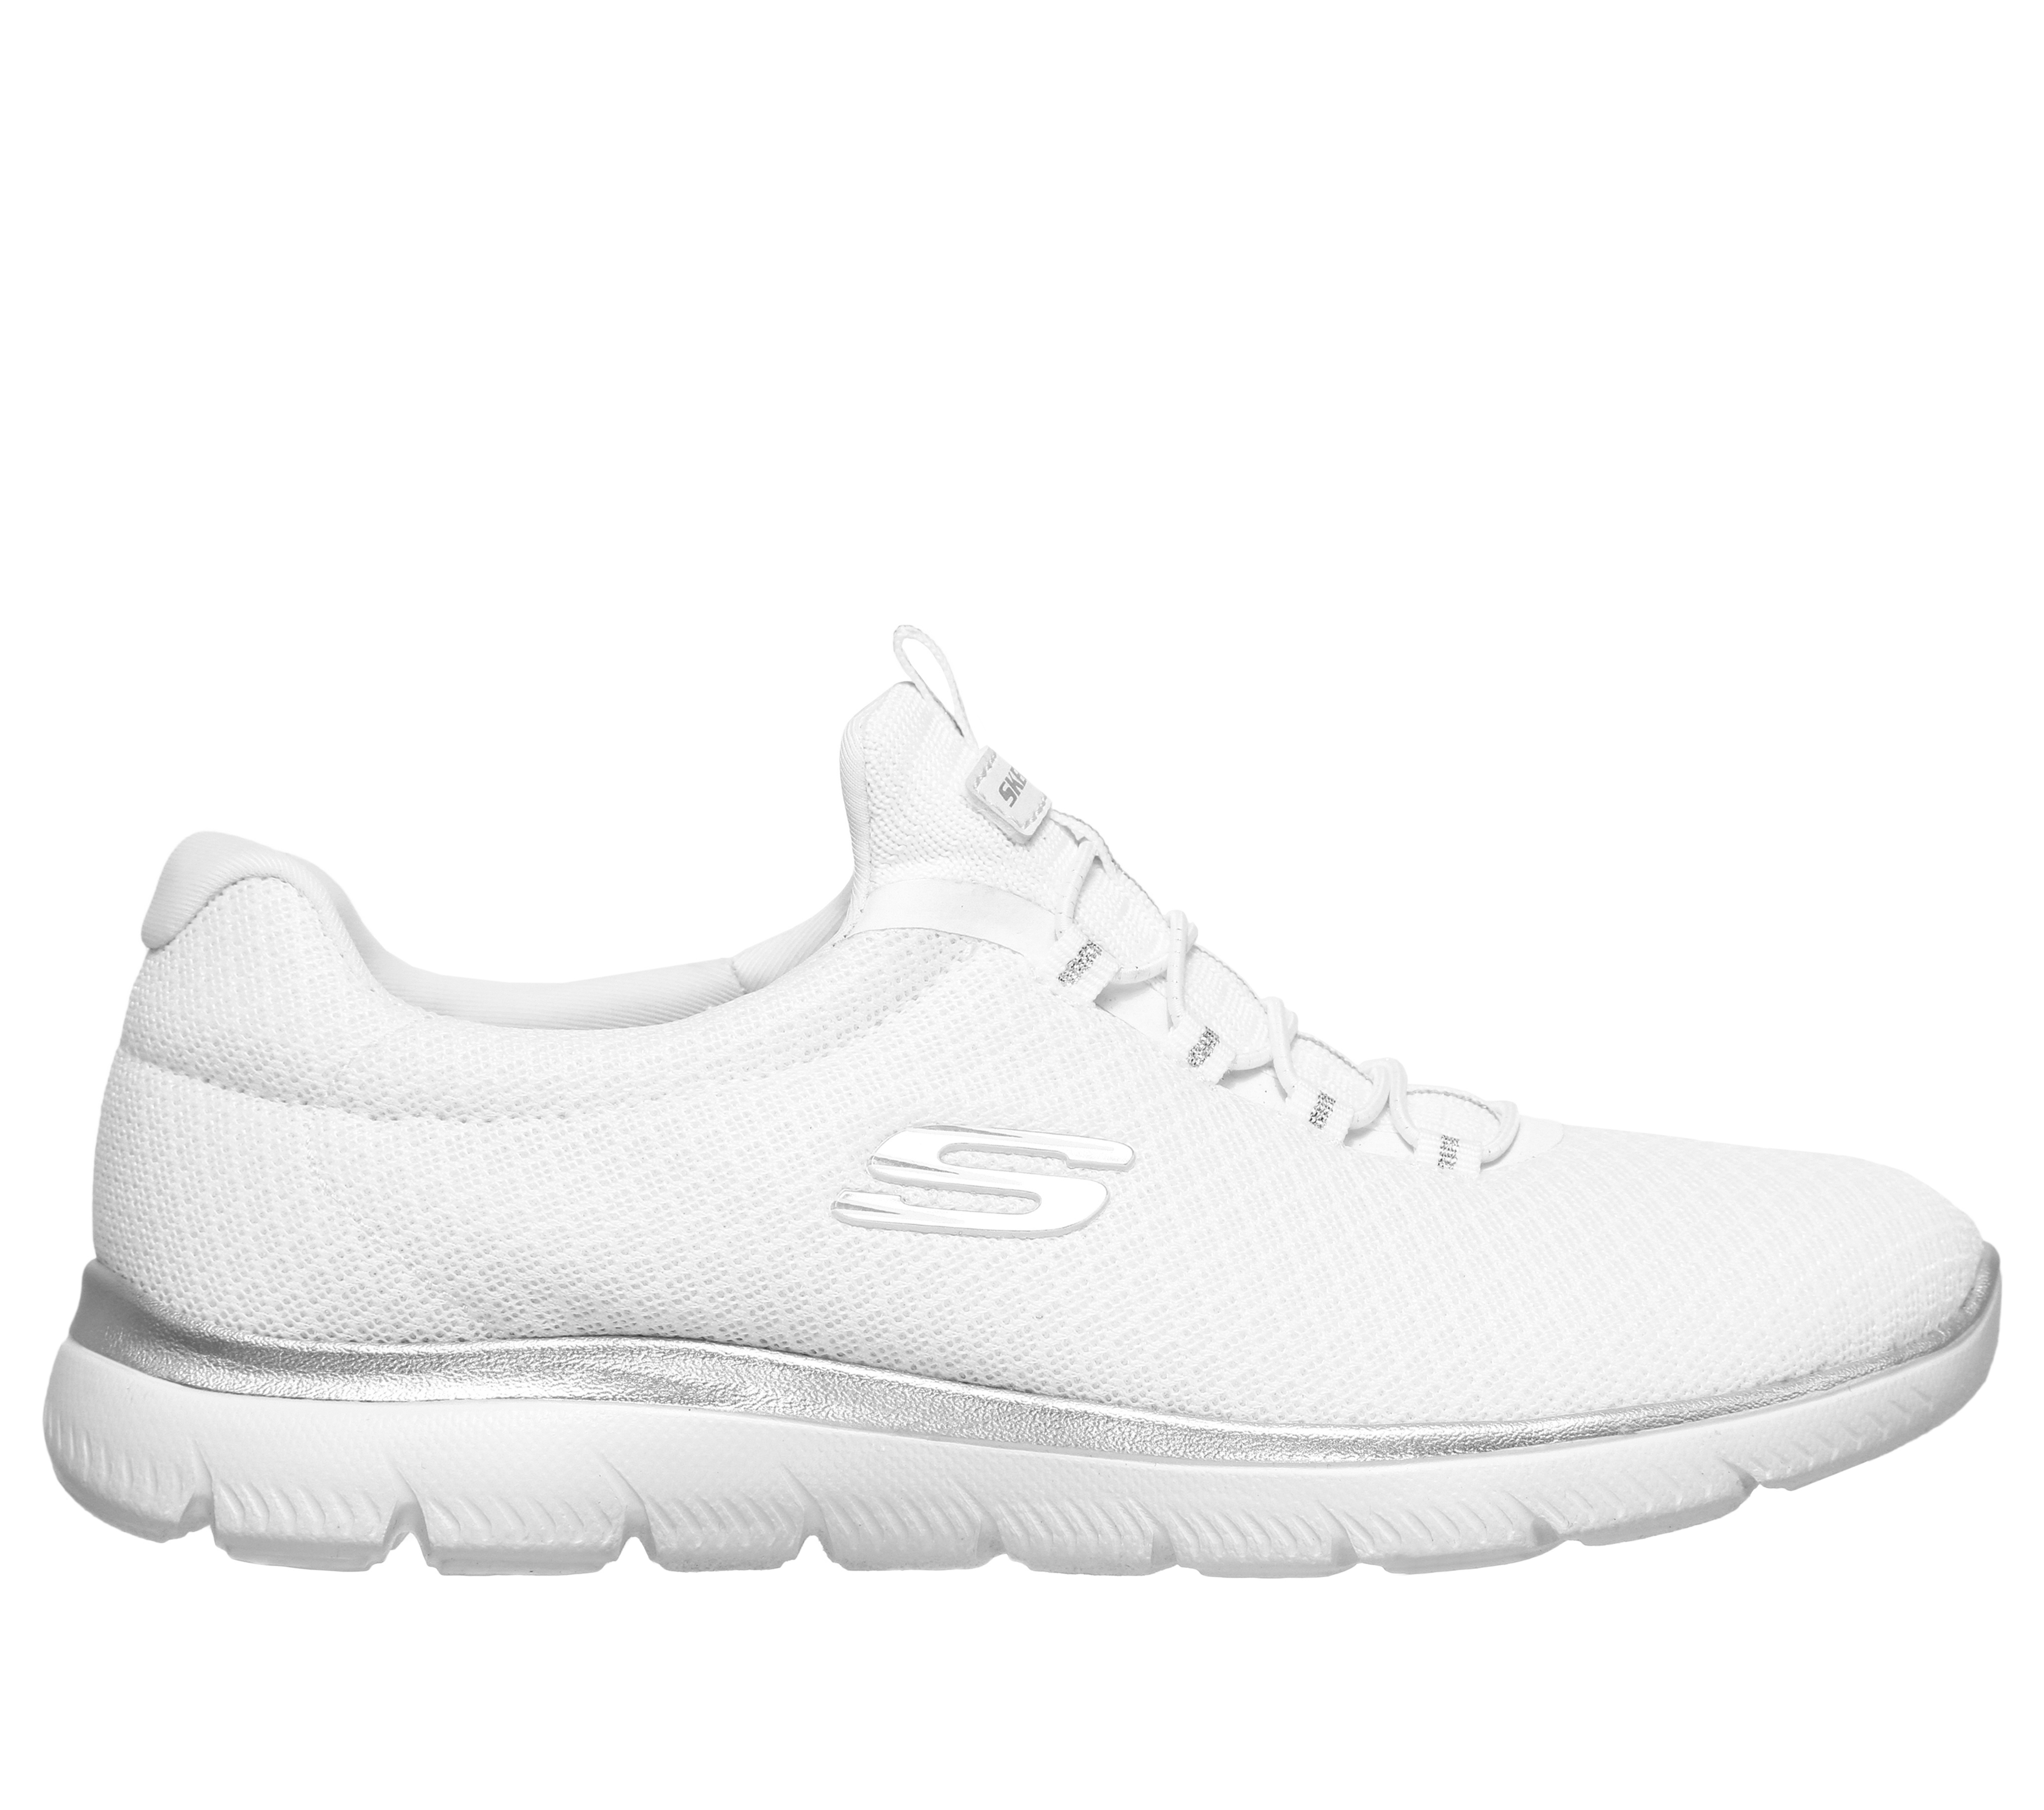 can you wash skechers relaxed fit memory foam shoes